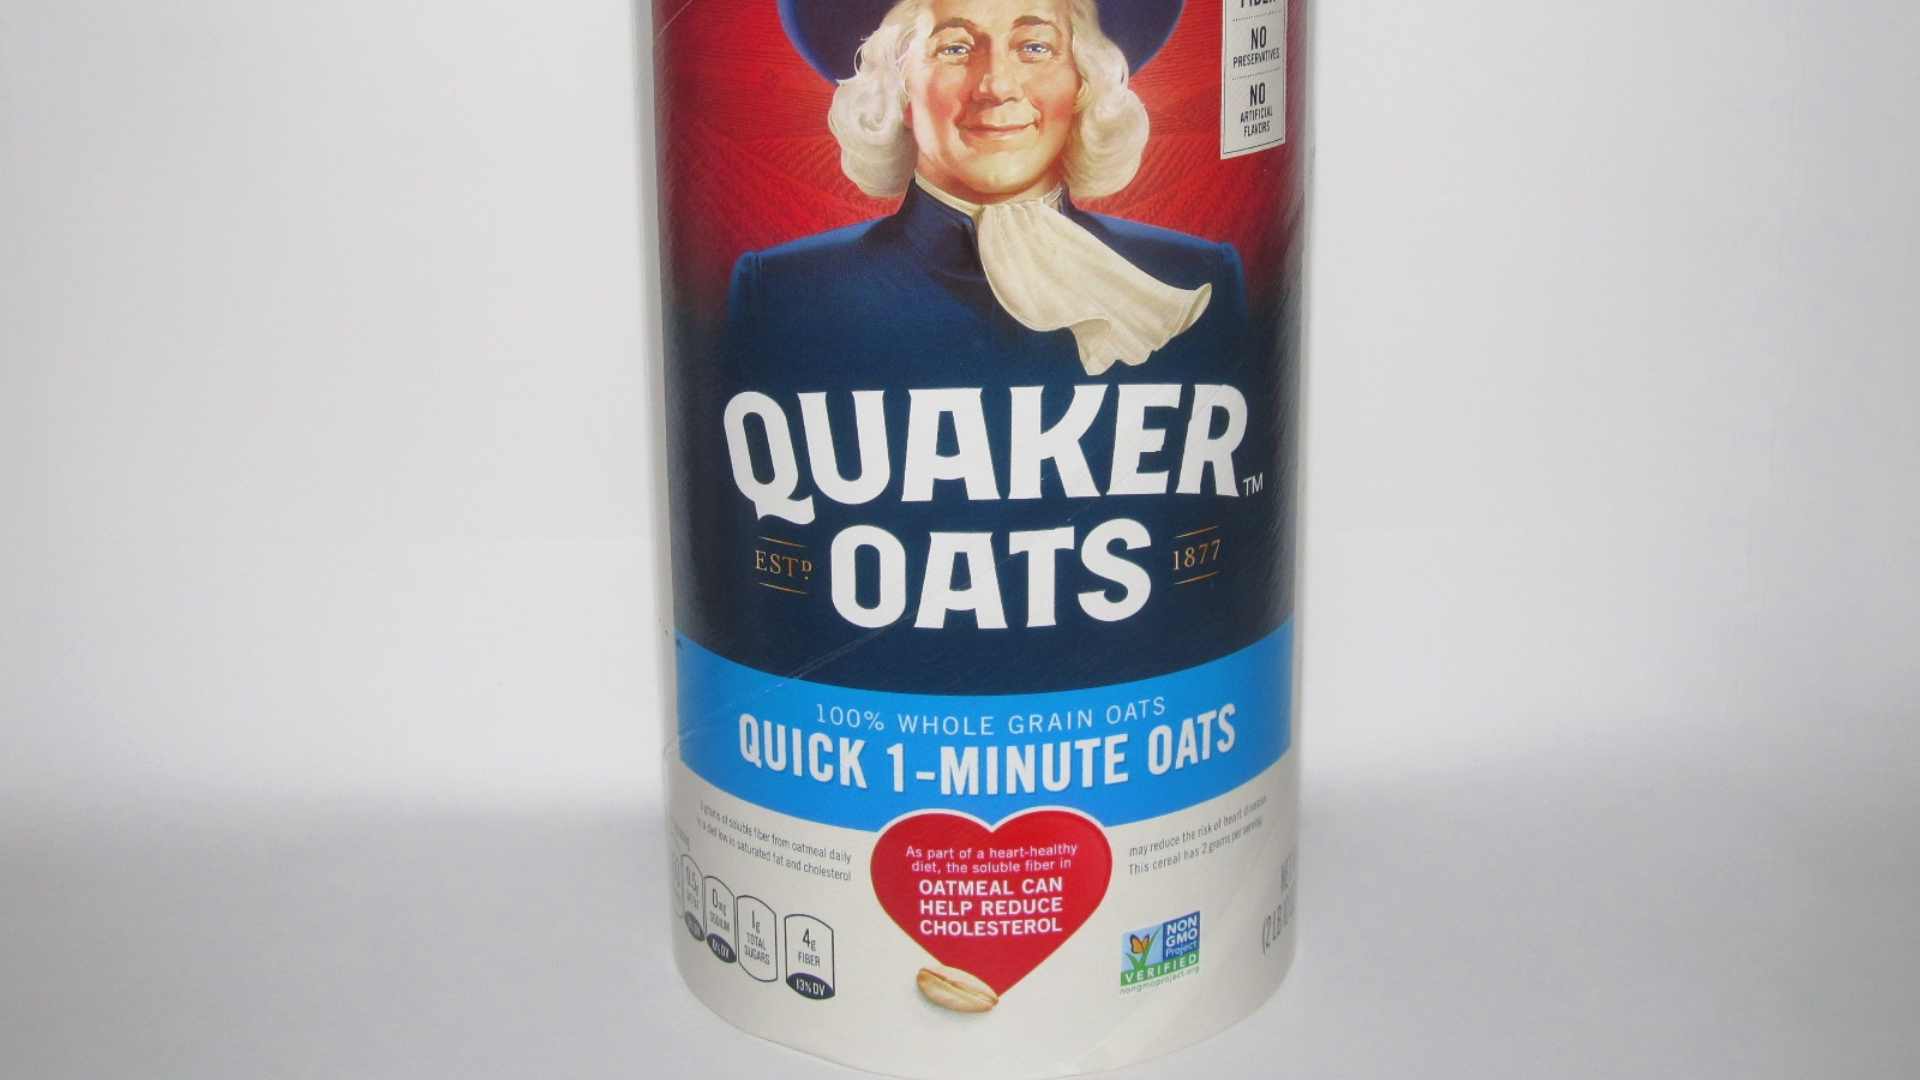 Quaker Oats Recalls More Products Due to Salmonella Outbreak